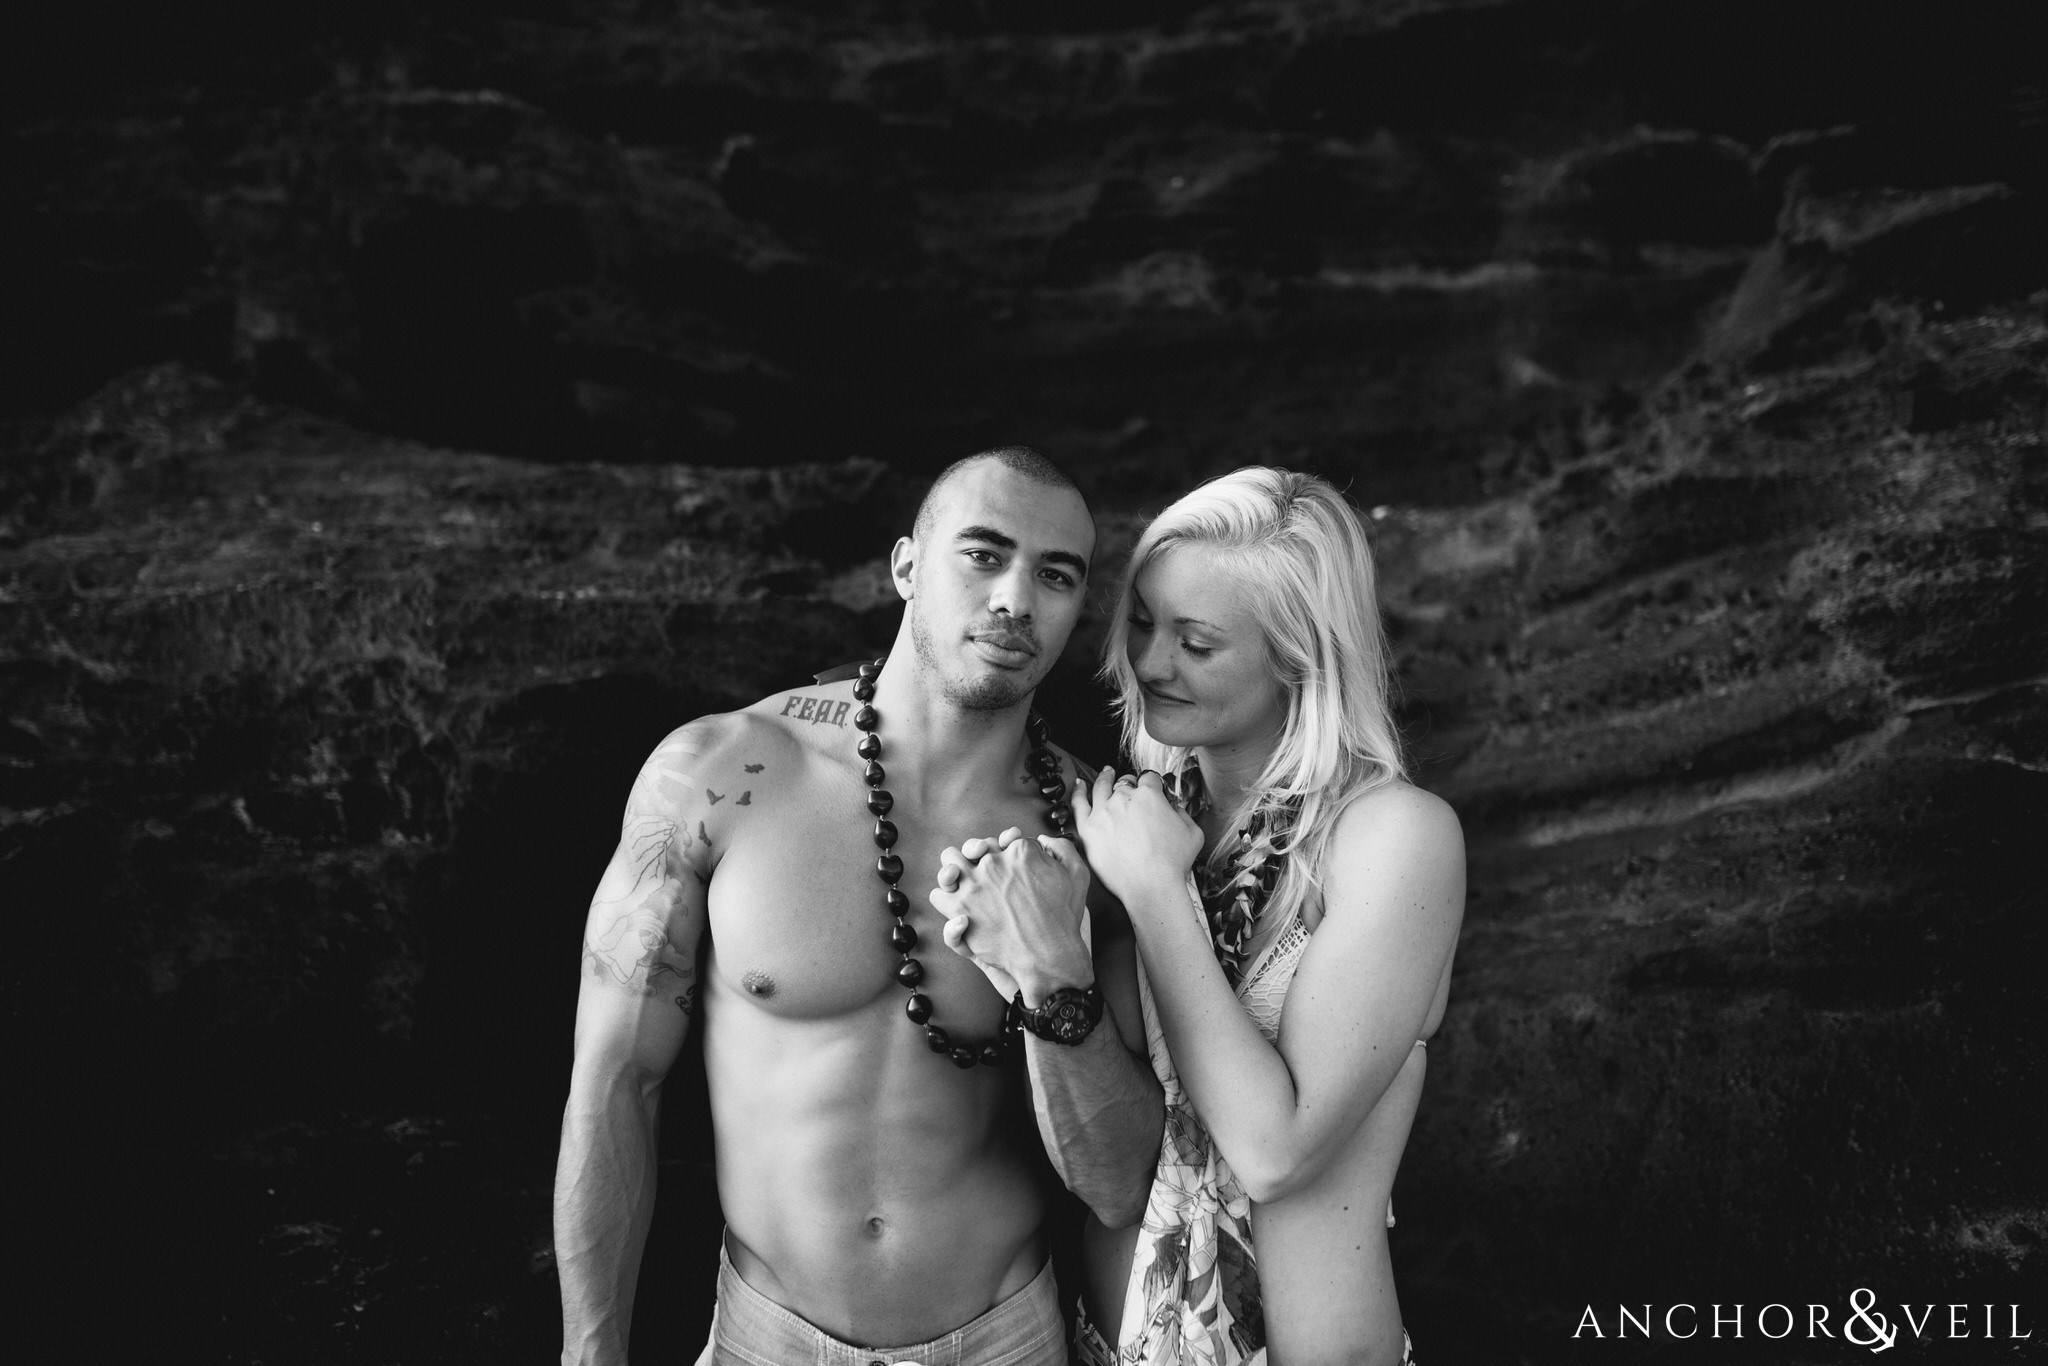 holding each other tight during their Eternity Beach Session in Honolulu Hawaii Halona Cove